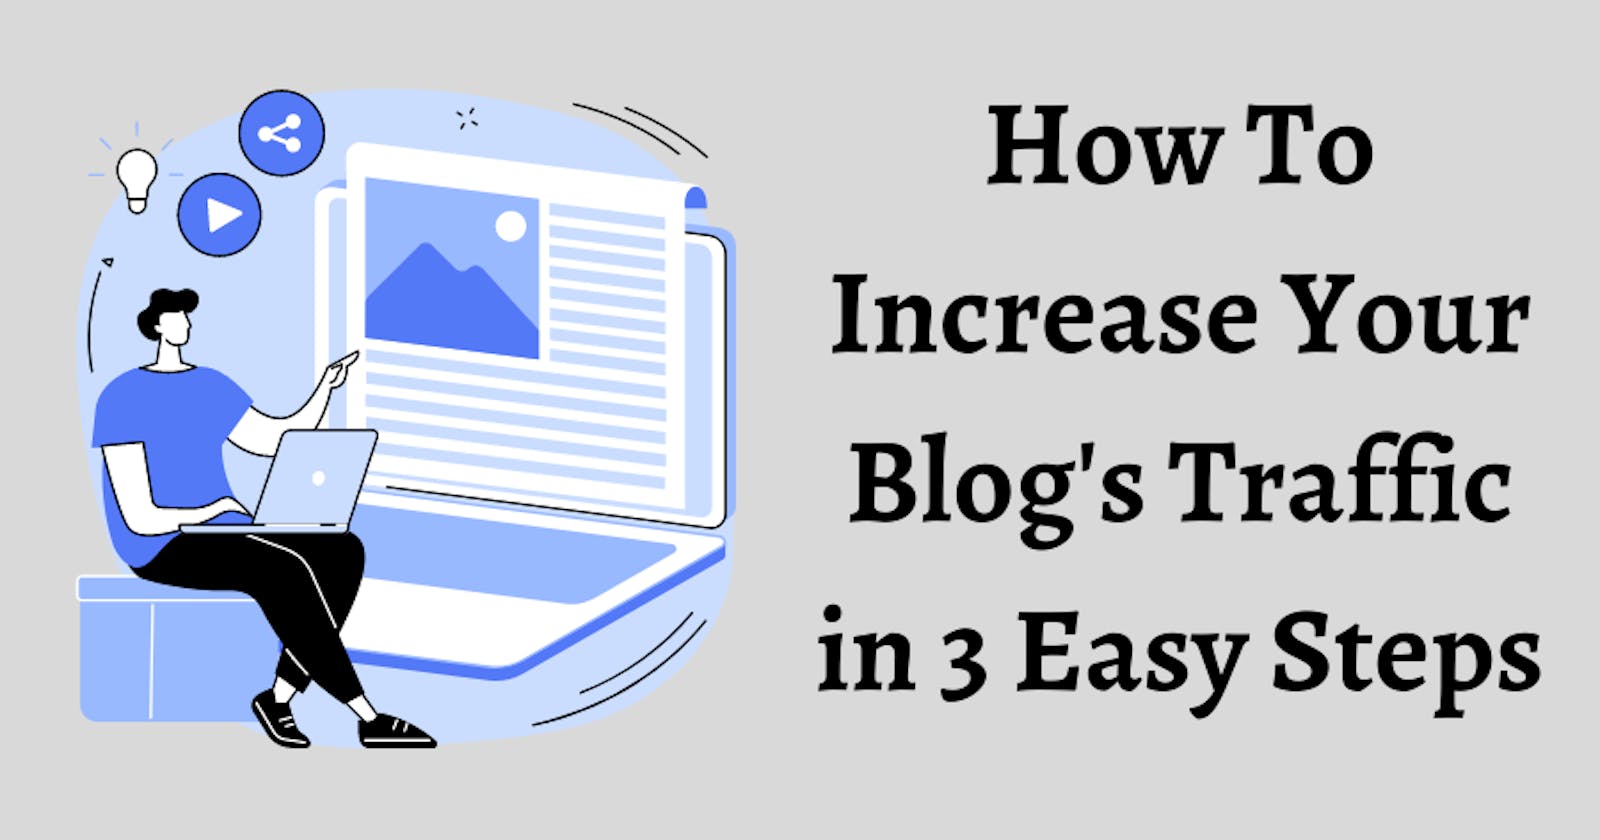 How To Increase Your Blog's Traffic in 3 Easy Steps